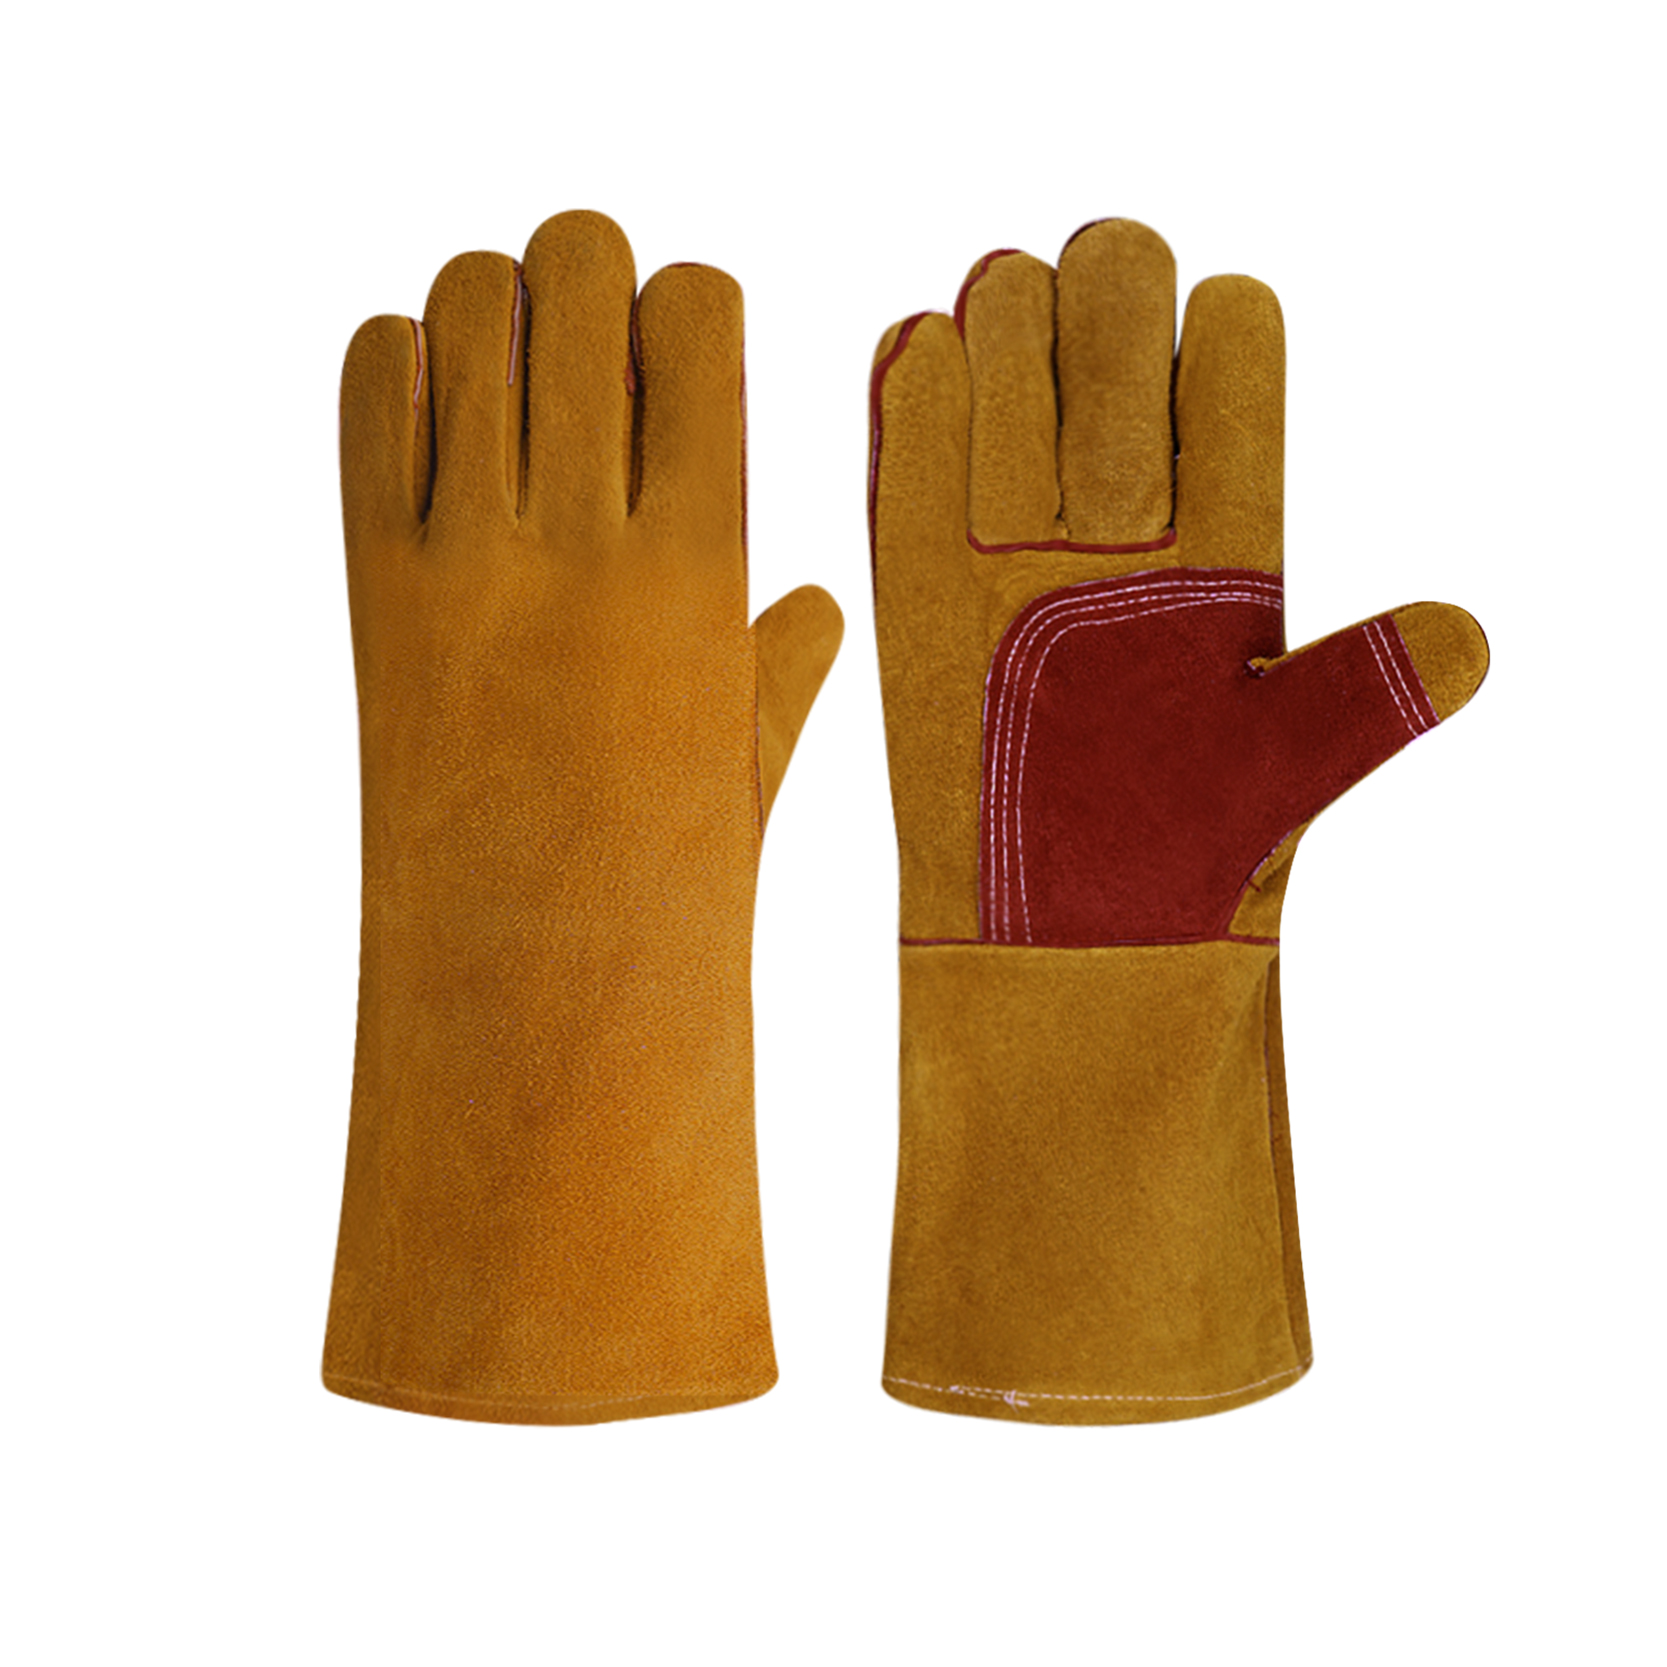 Long Industrial Protective Cow Split Leather Safety Gloves Working Gloves Tig Welding Gloves